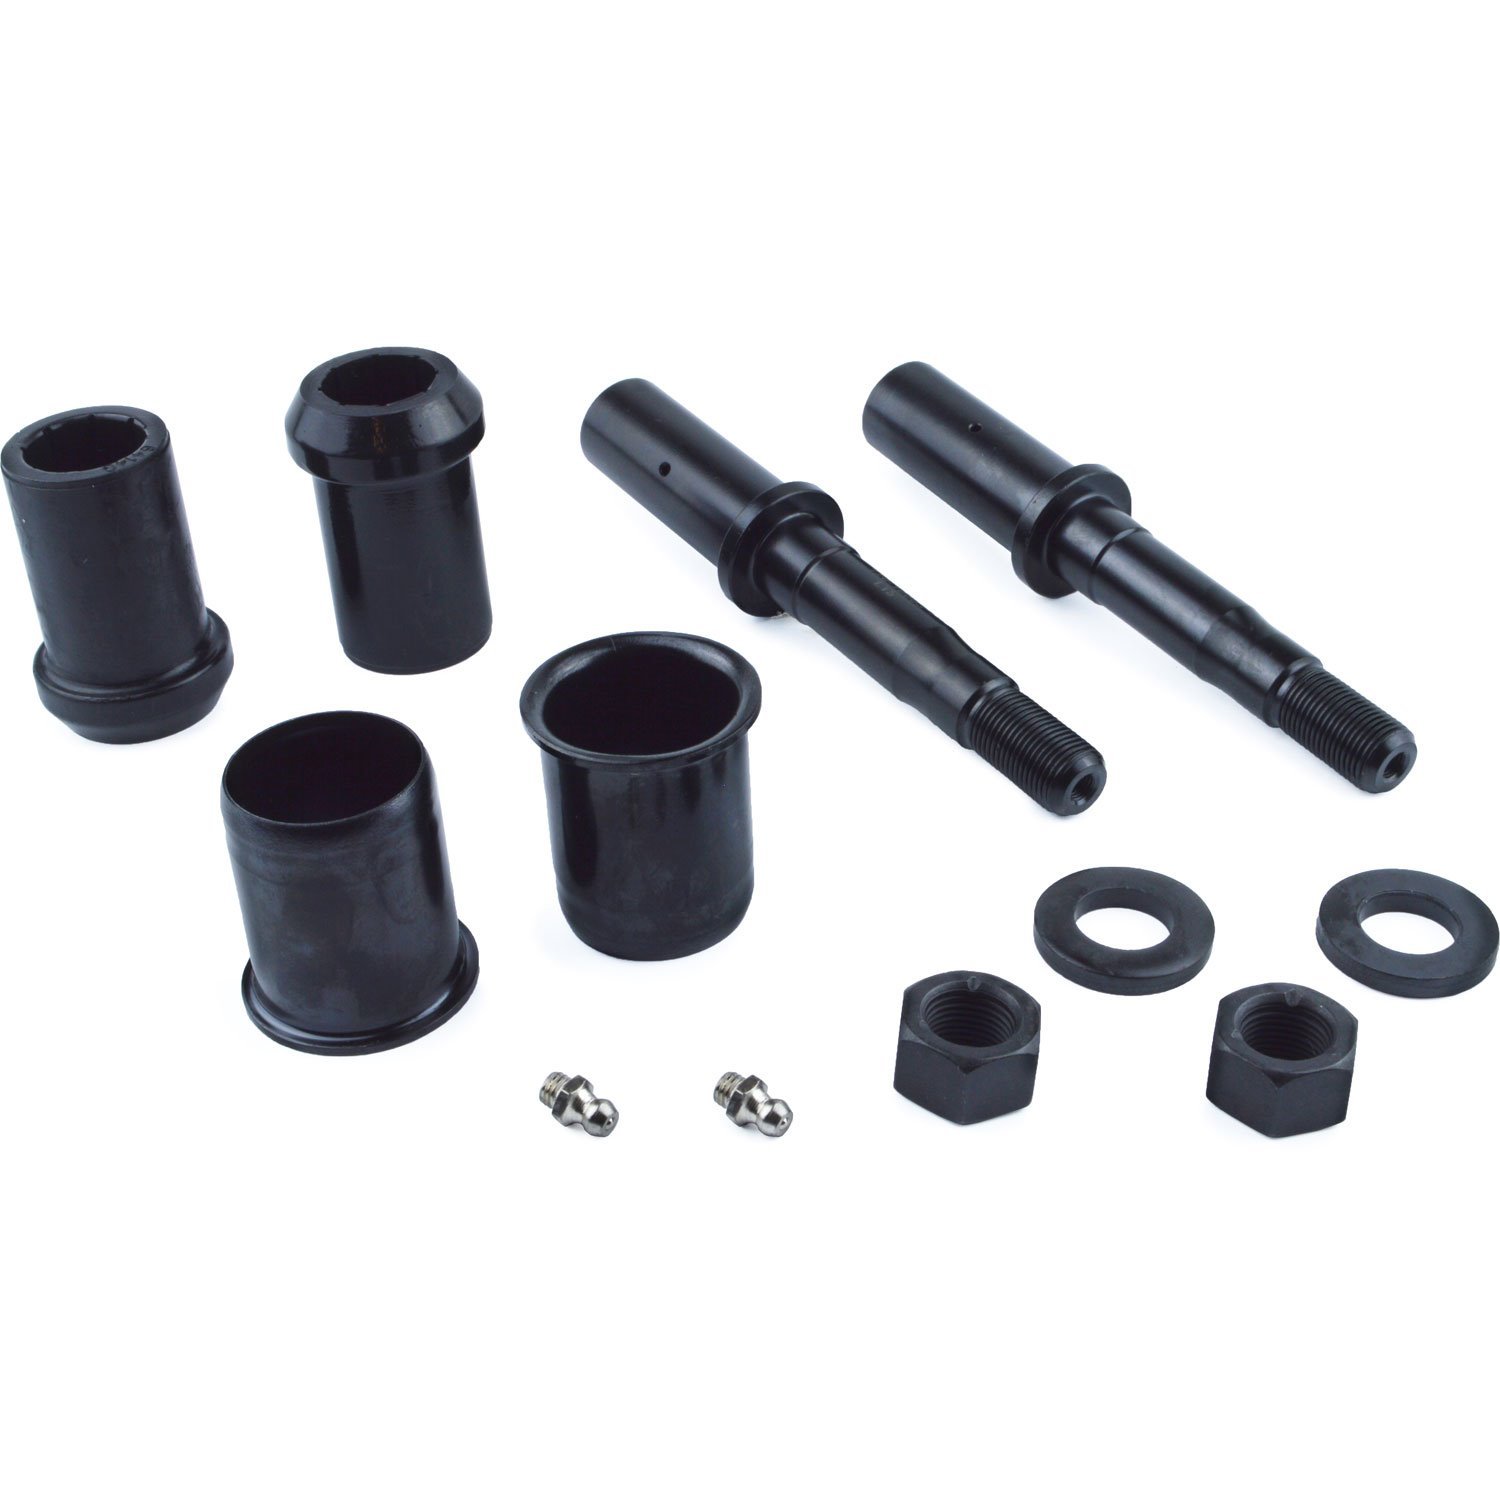 Greasable polyurethane bushings for ultimate handling; High-strength steel shafts; Includes bushings